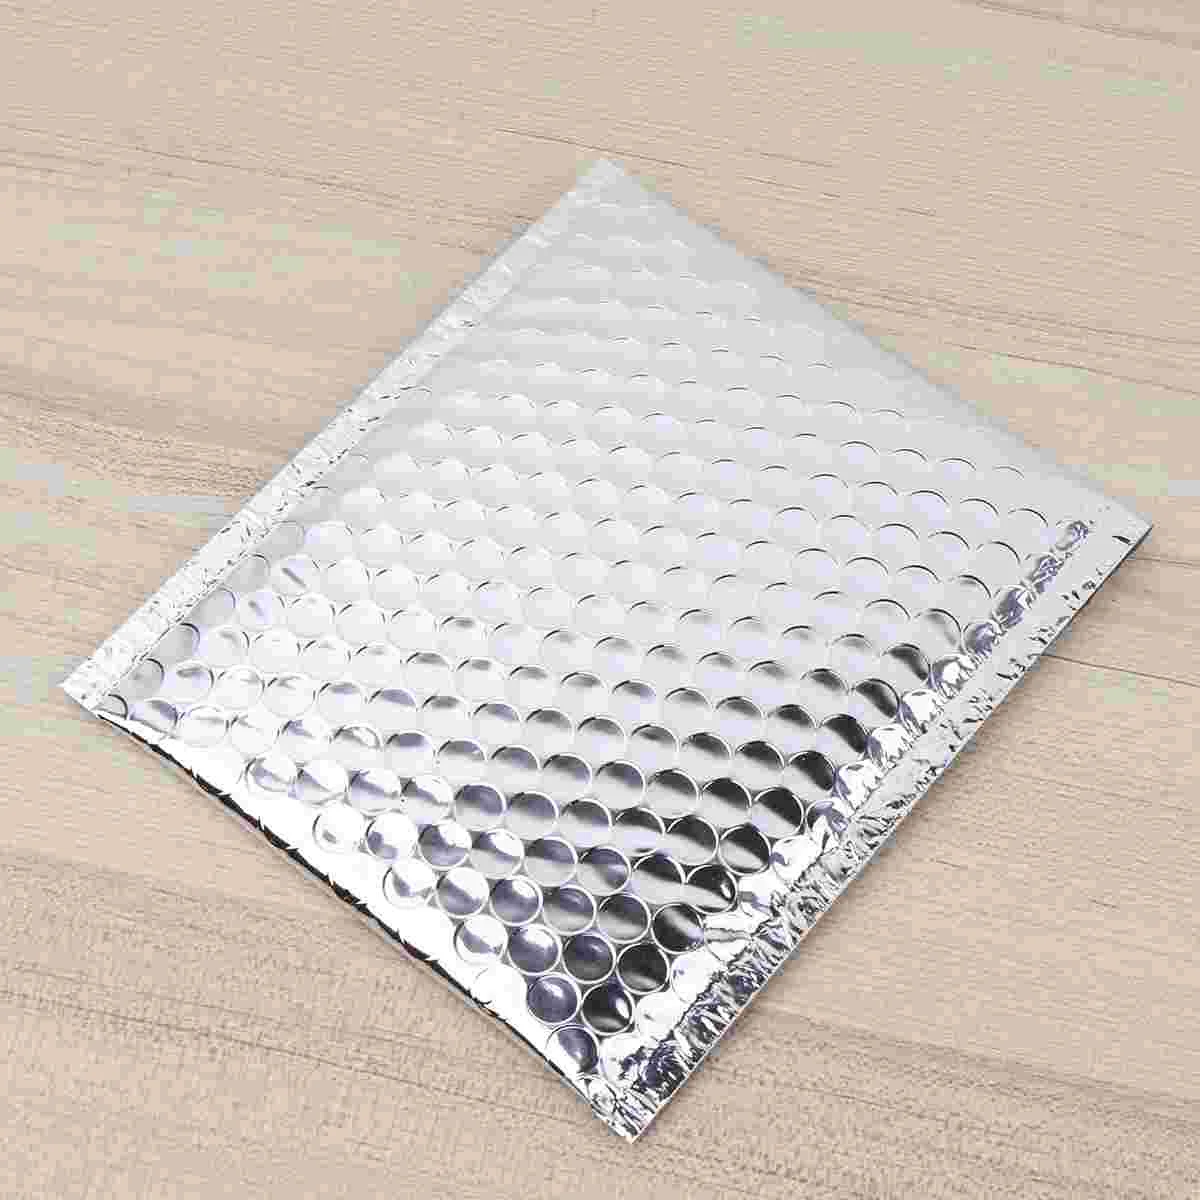 28 Pcs Bubble Bag Shockproof Packaging Metal Small Envelope Waterproof Logistic Express pearl cotton bag packaging soft foam board film bubble filled shockproof 100pcs 15 25cm specifications packing material